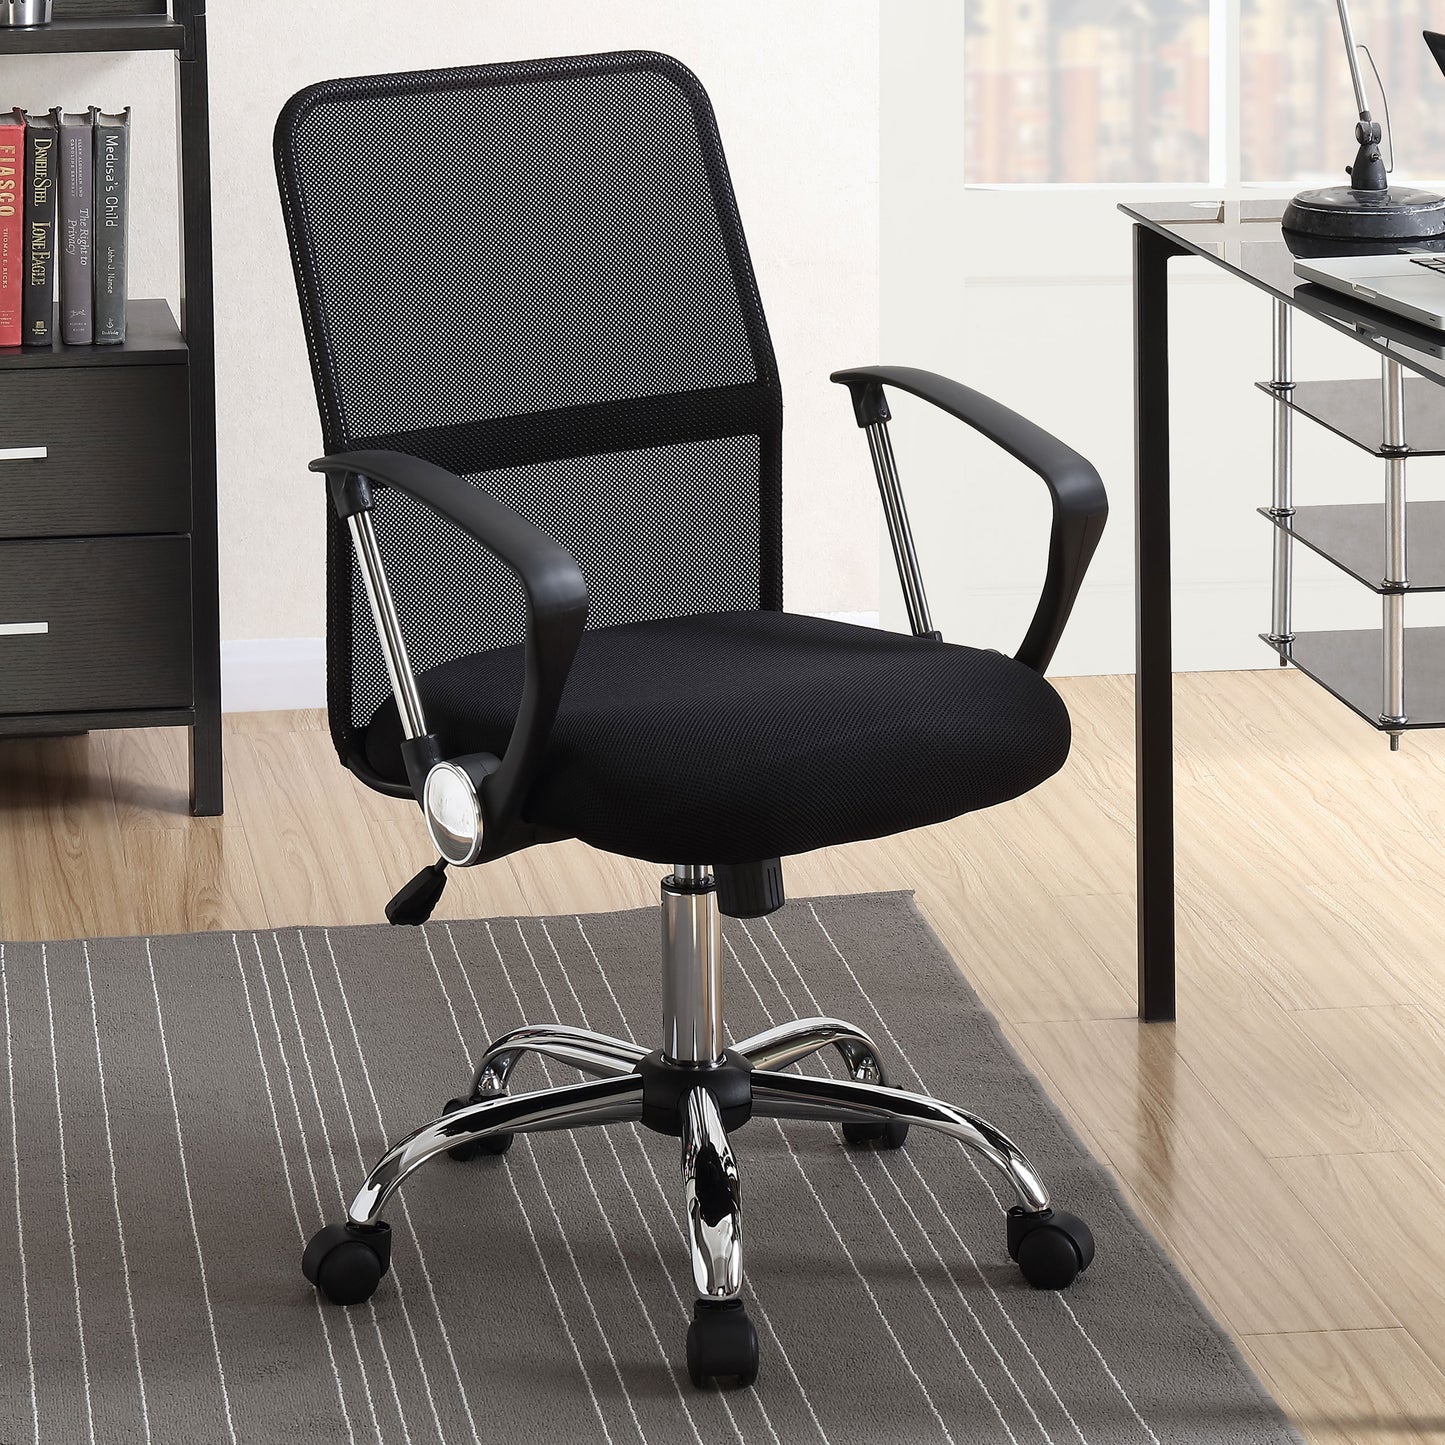 Gerta Office Chair with Mesh Backrest Black and Chrome